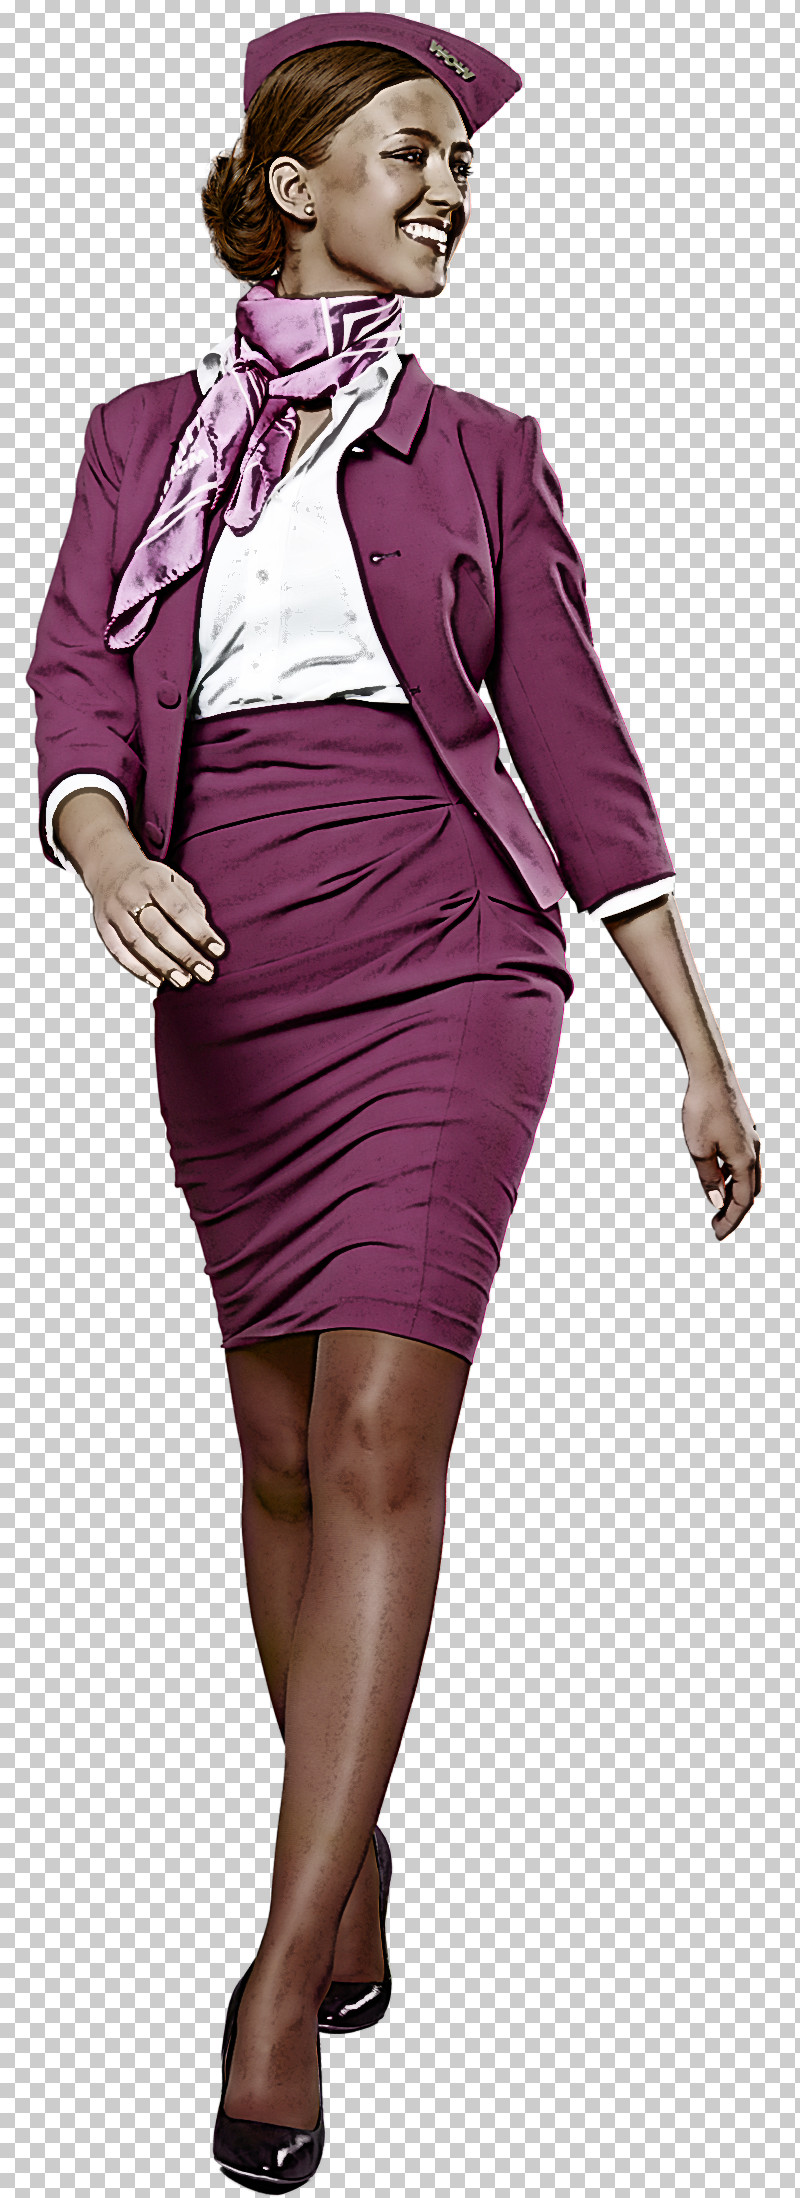 Clothing Purple Violet Dress Sleeve PNG, Clipart, Clothing, Cocktail Dress, Dress, Fashion Model, Magenta Free PNG Download